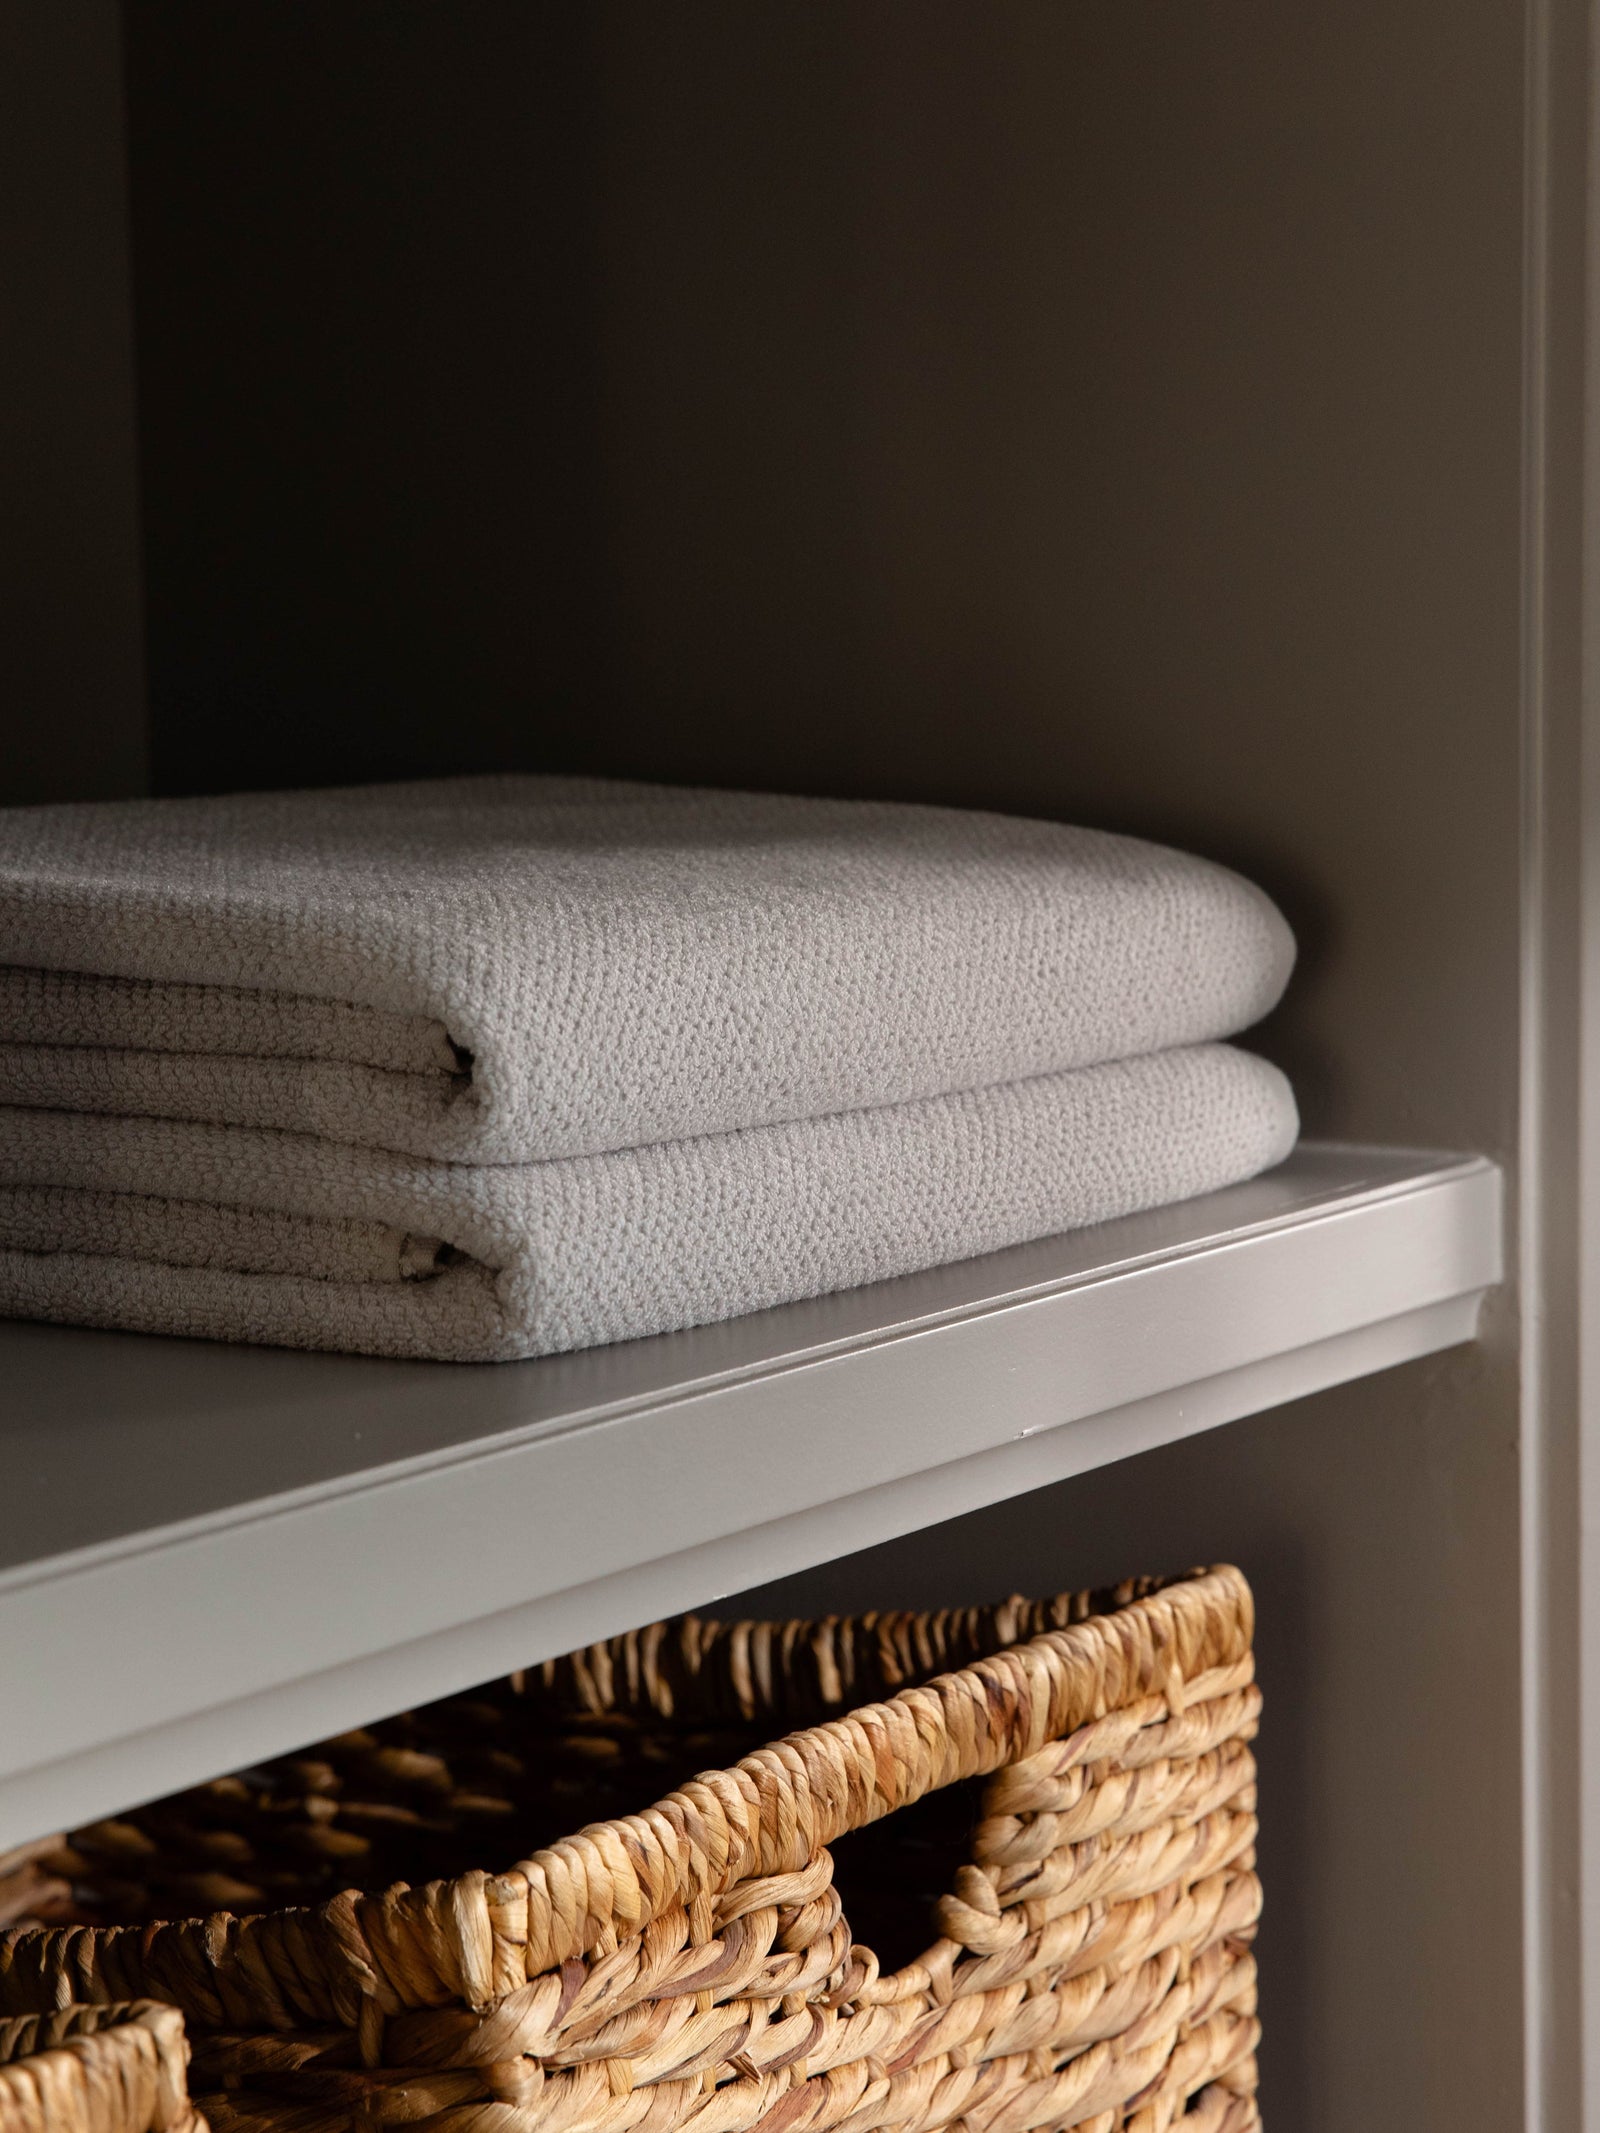 Nantucket Bath Towels in the color Heathered Light Grey. Photo of Nantucket Bath Towels taken as the towels rest on a shelf in a bathroom. 